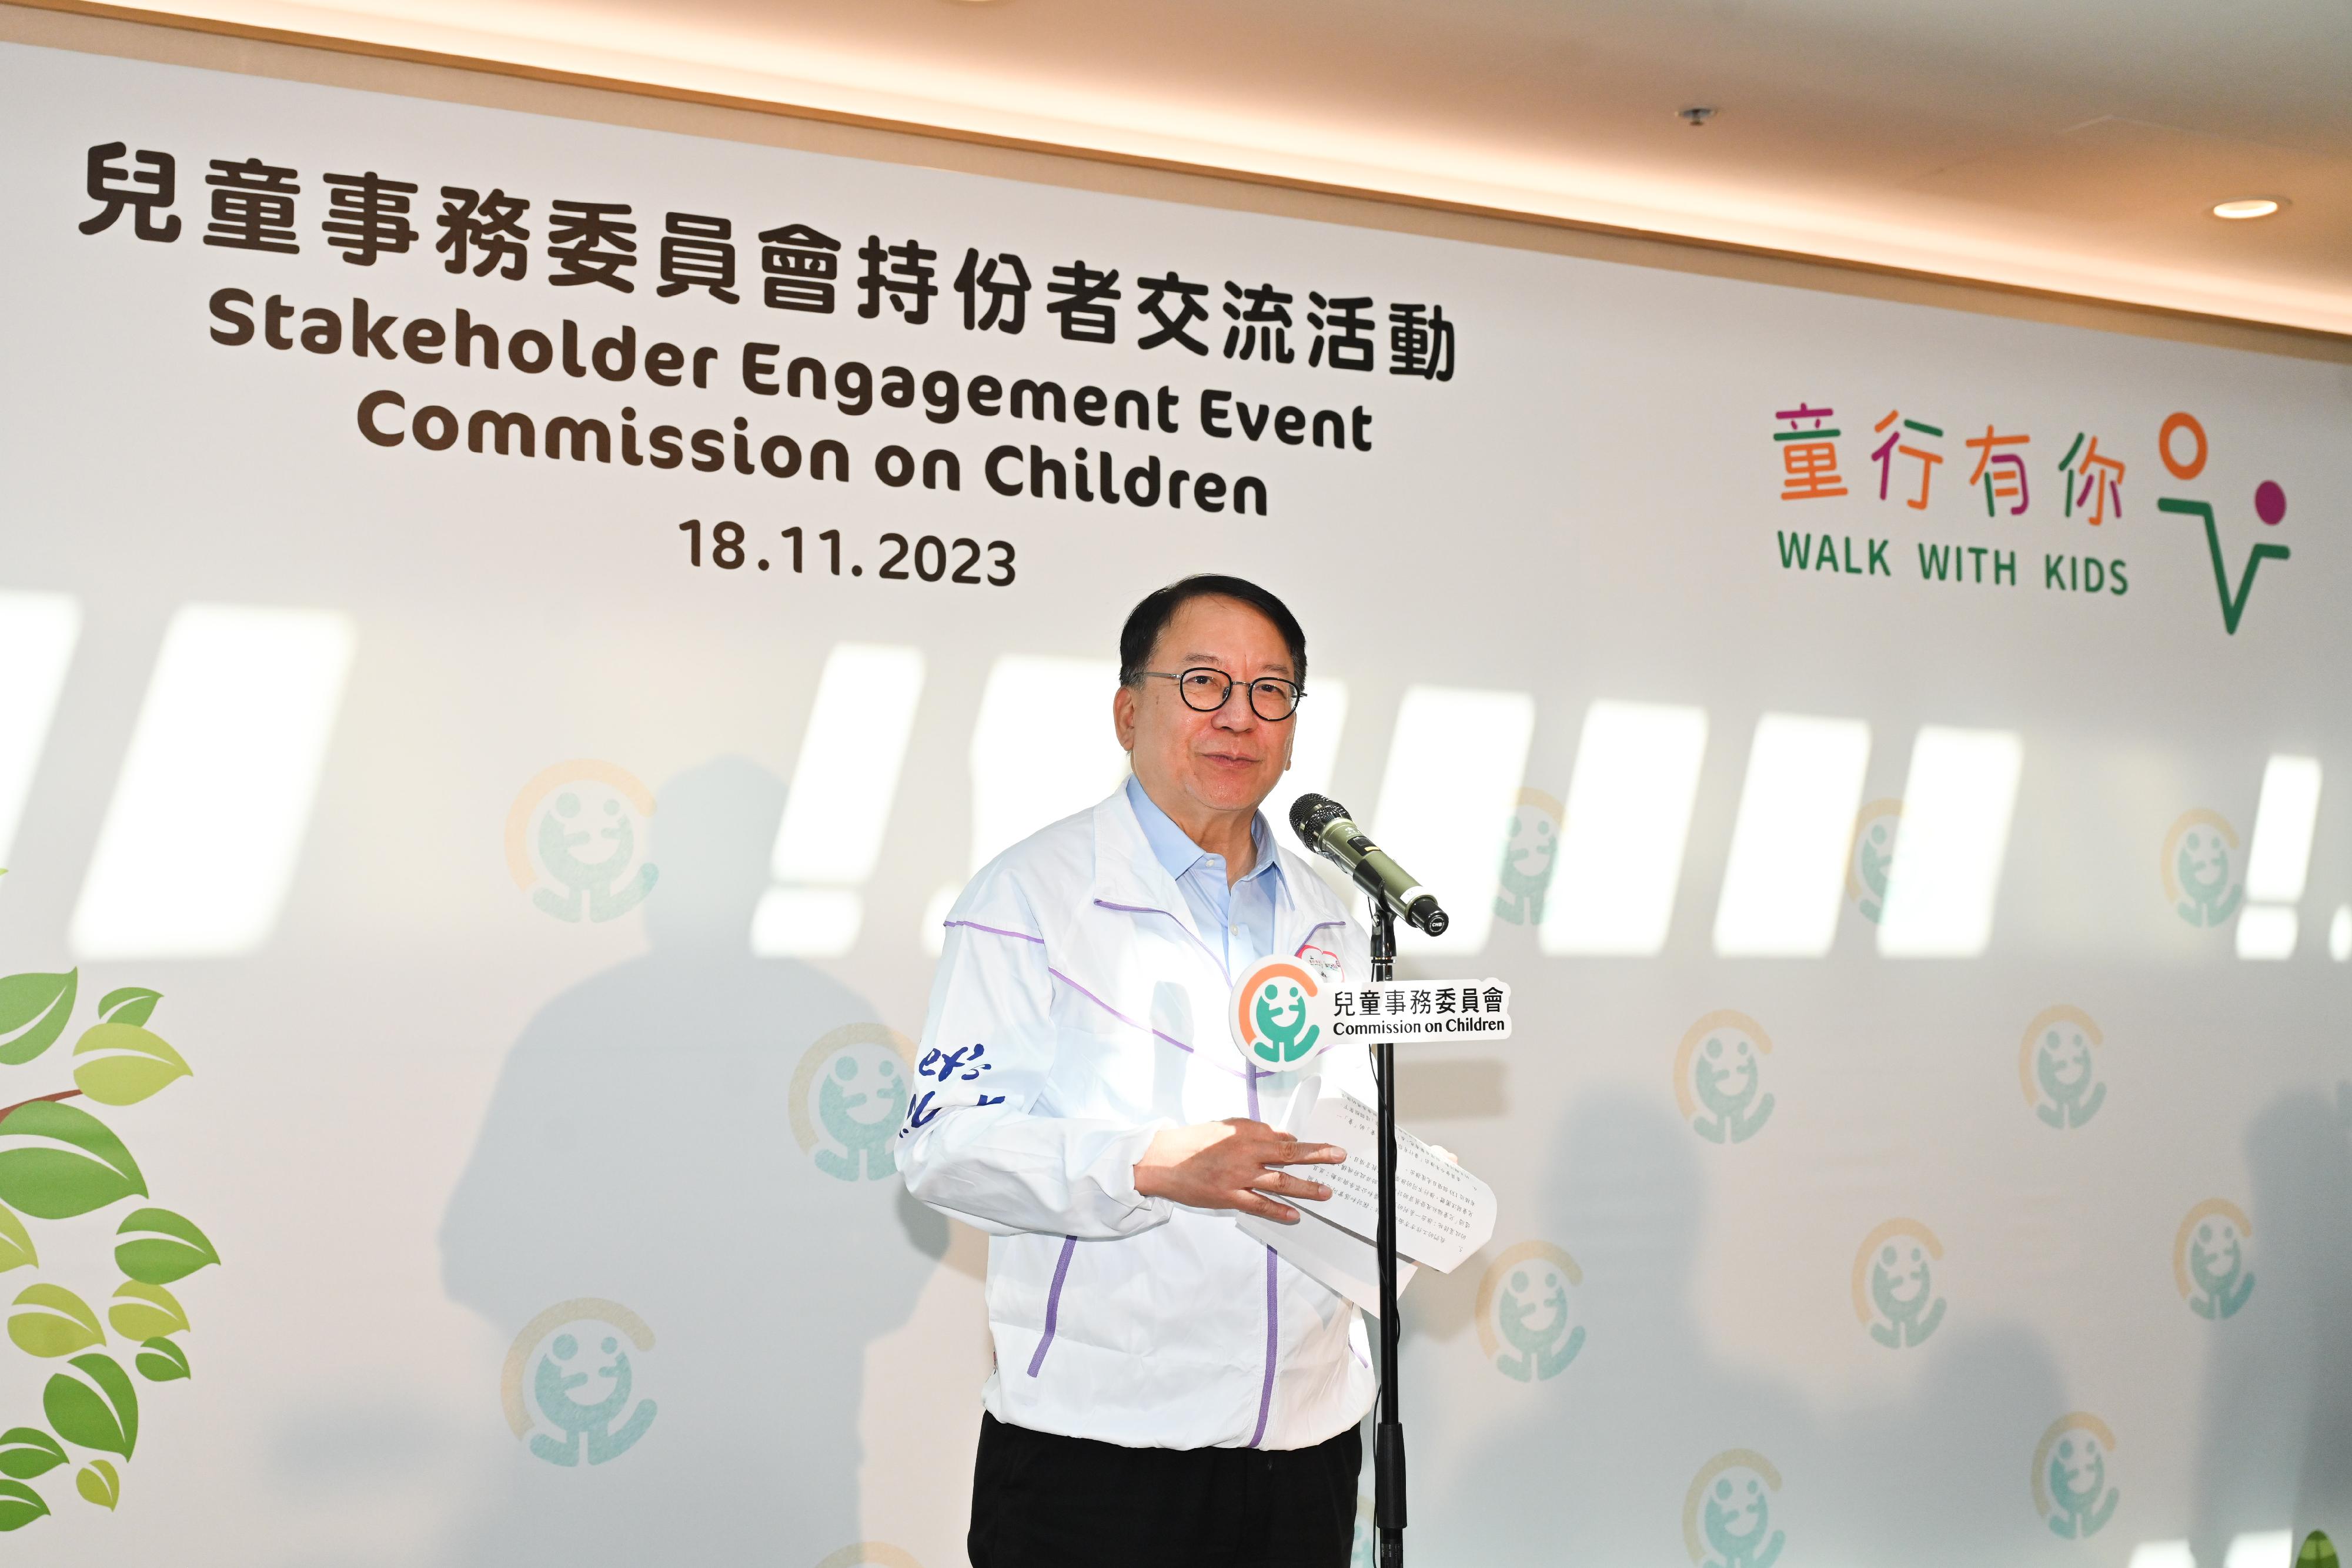 The Chief Secretary for Administration and Chairperson of the Commission on Children (CoC), Mr Chan Kwok-ki, today (November 18) hosted the CoC's "Walk with Kids" stakeholder engagement event. Photo shows Mr Chan speaking at the event.